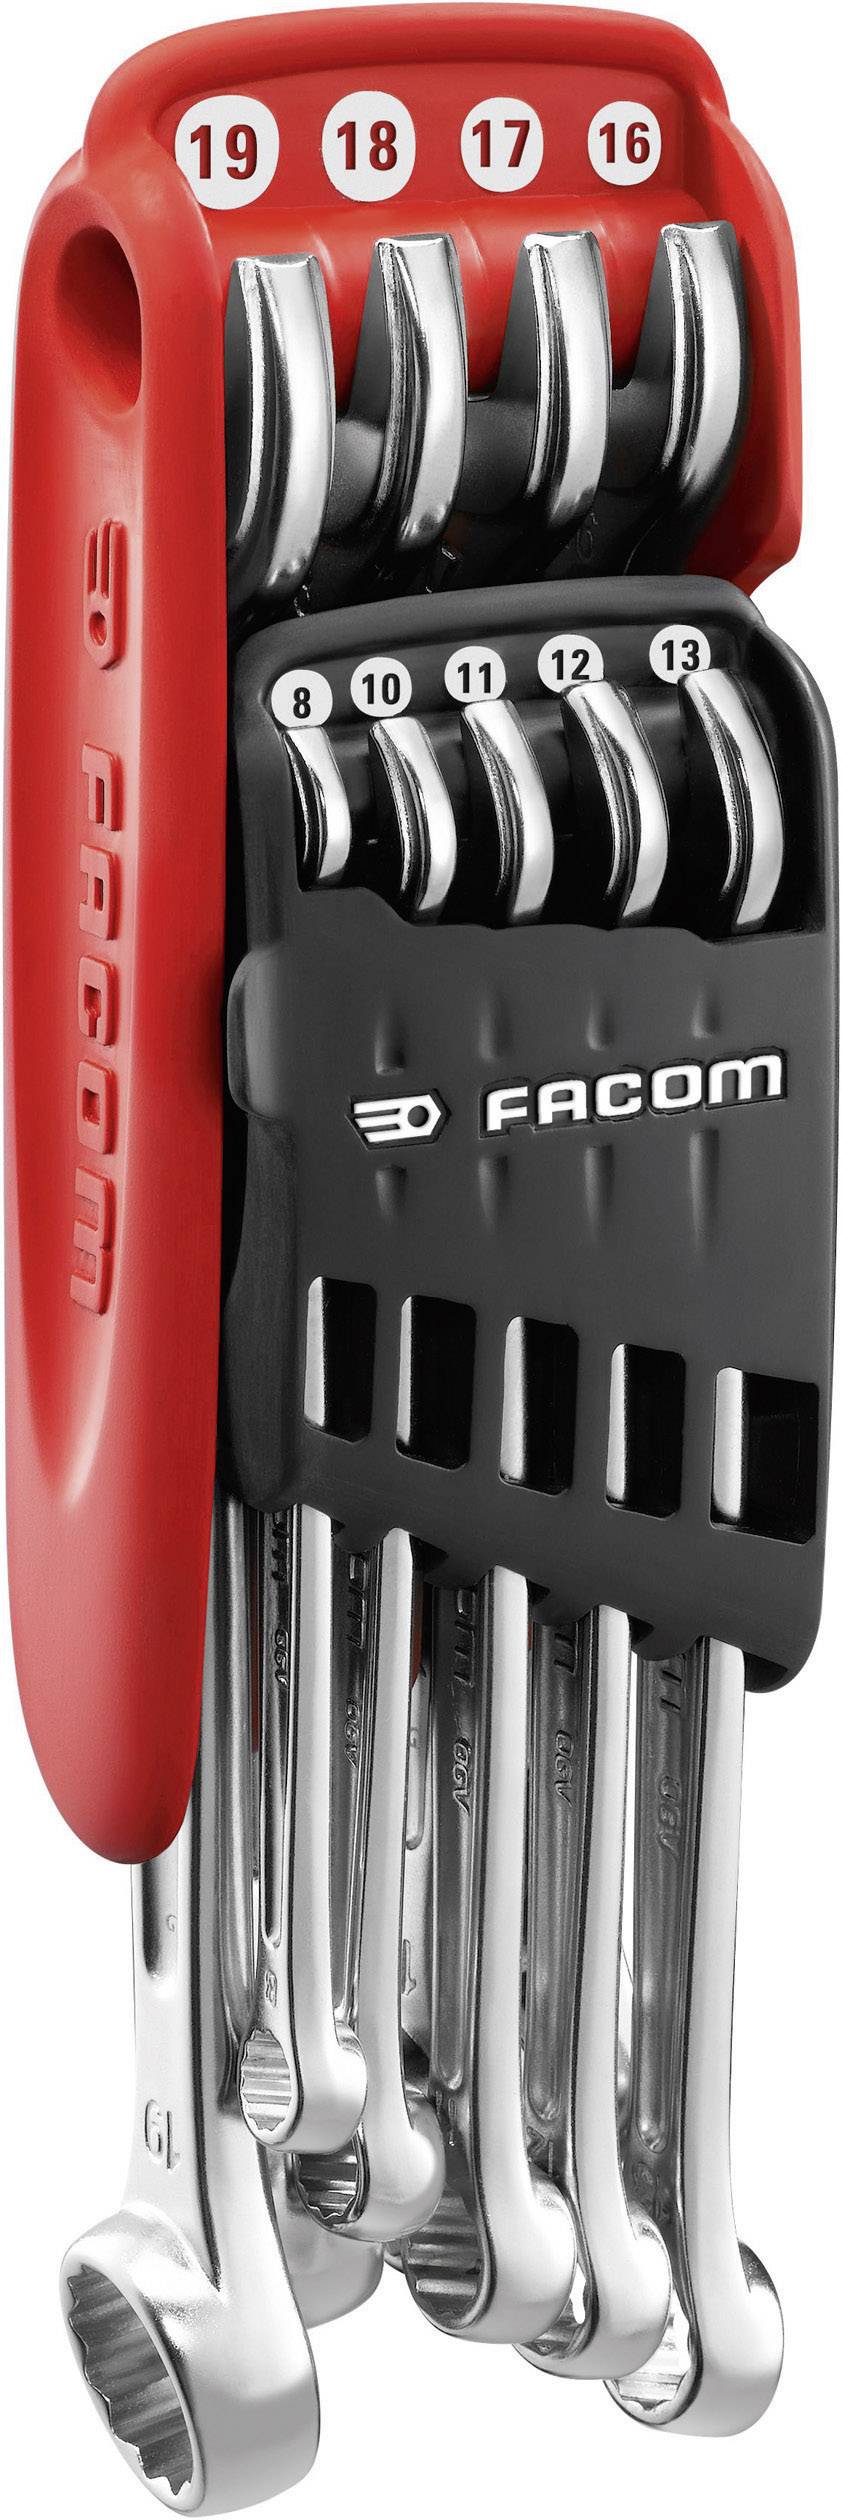 “Expert by Facom” E113240 18 Piece Metric Combination Spanner Set 6-24mm 